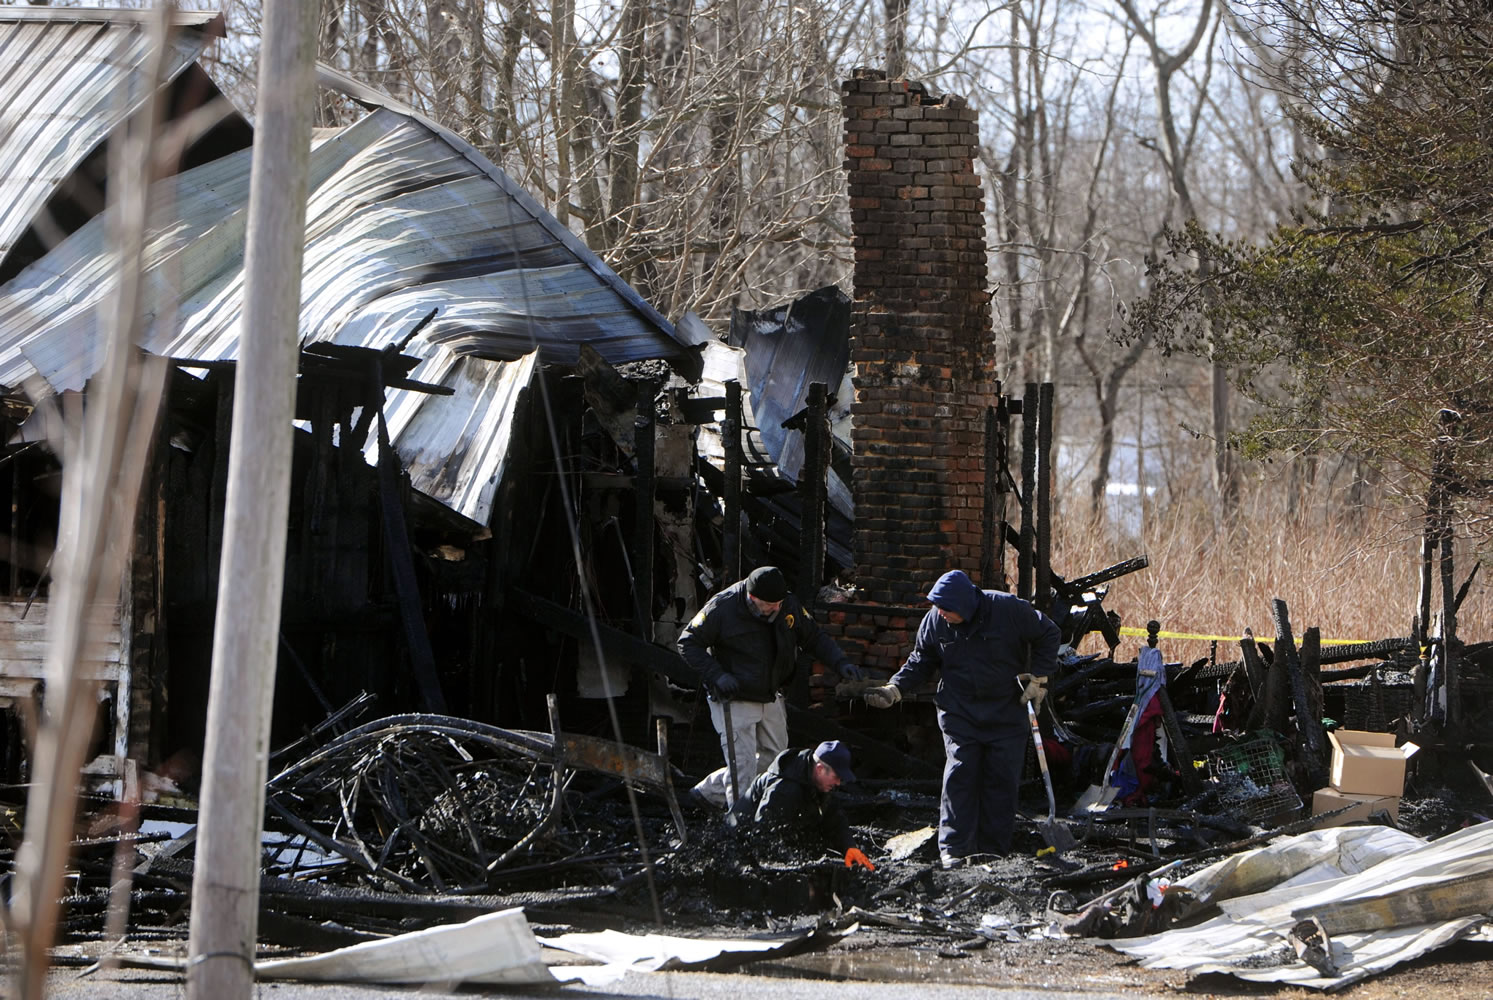 Alan Gregory, with the Kentucky Fire Marshal's office, at bottom, digs through debris Thursday after a house fire that killed nine members of an 11-member family  in Depoy near Greenville.